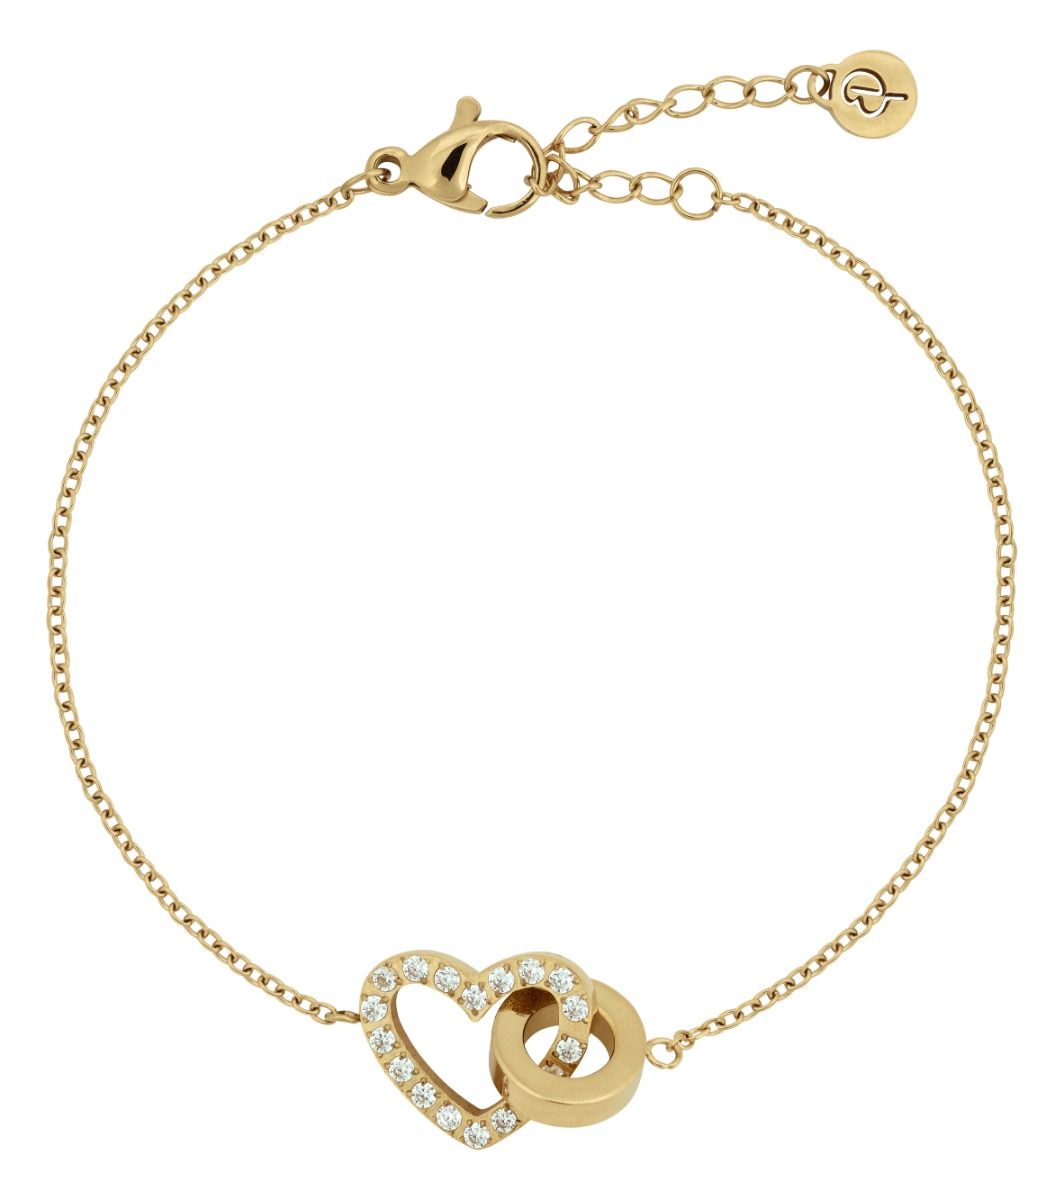 gold bracelet chain with small gold band interlocked with gold heart covered with cubic zirconia